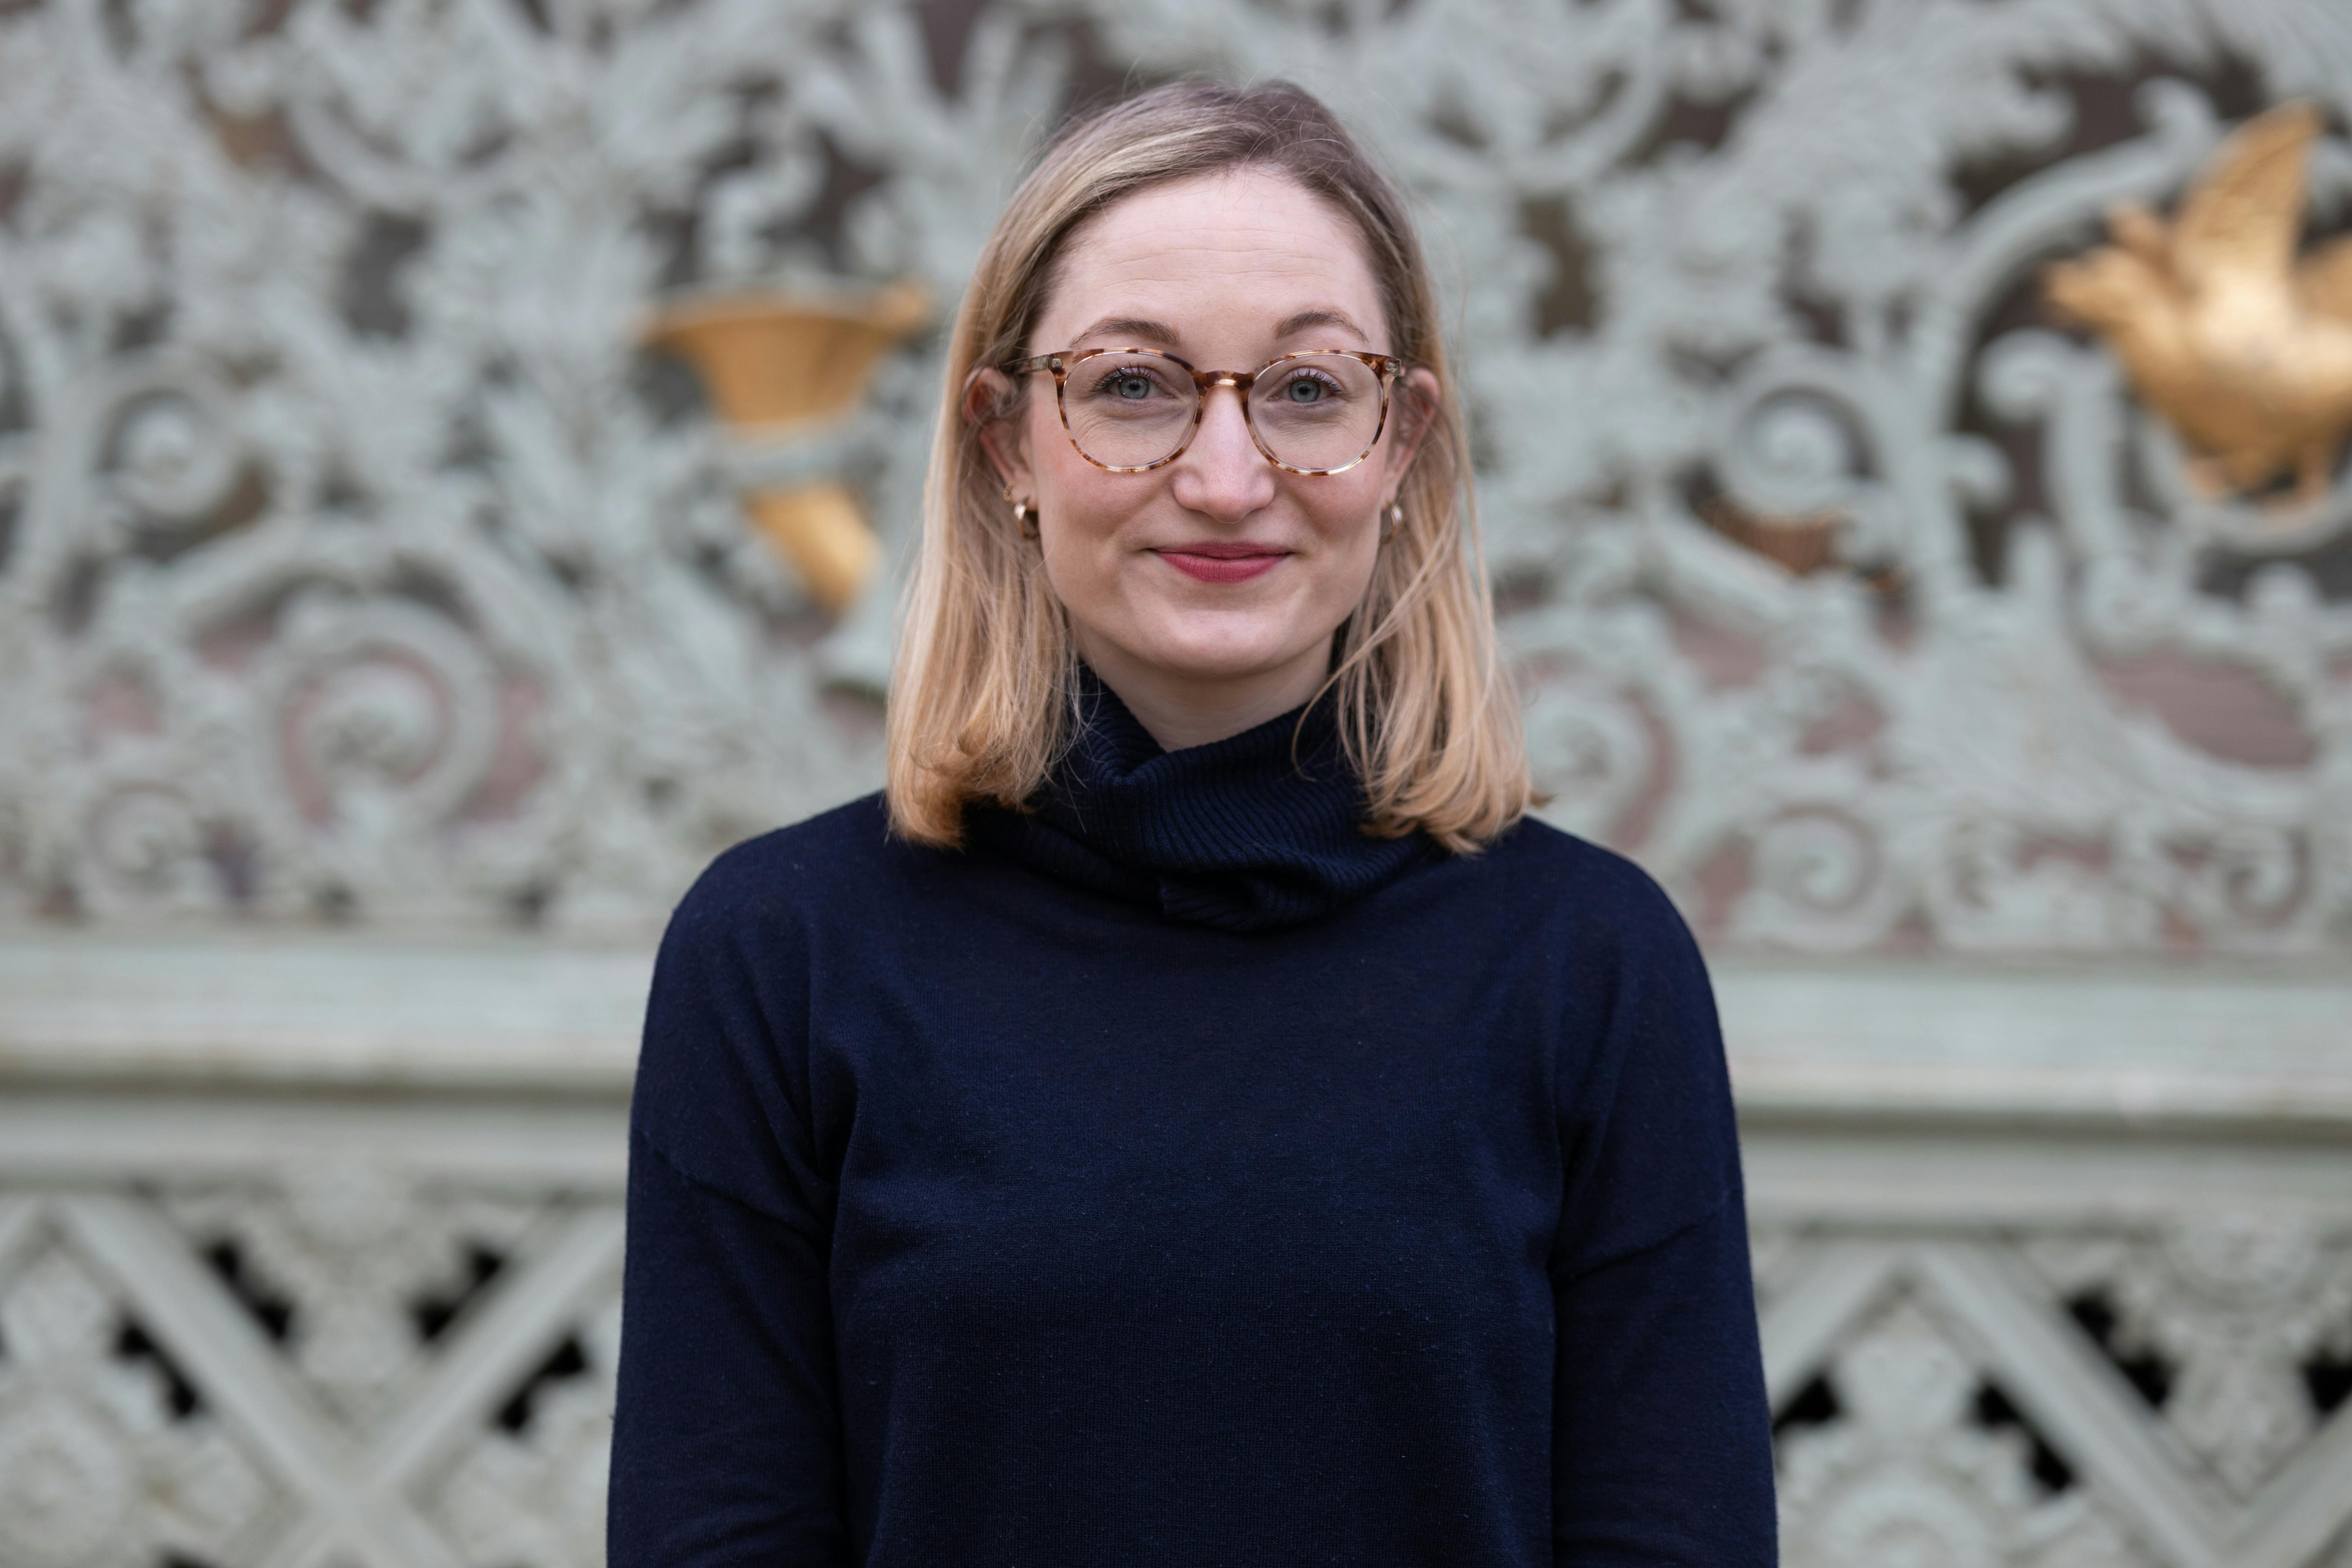 Sophie Pornschlegel, new Director of Studies and Development at Europe Jacques Delors